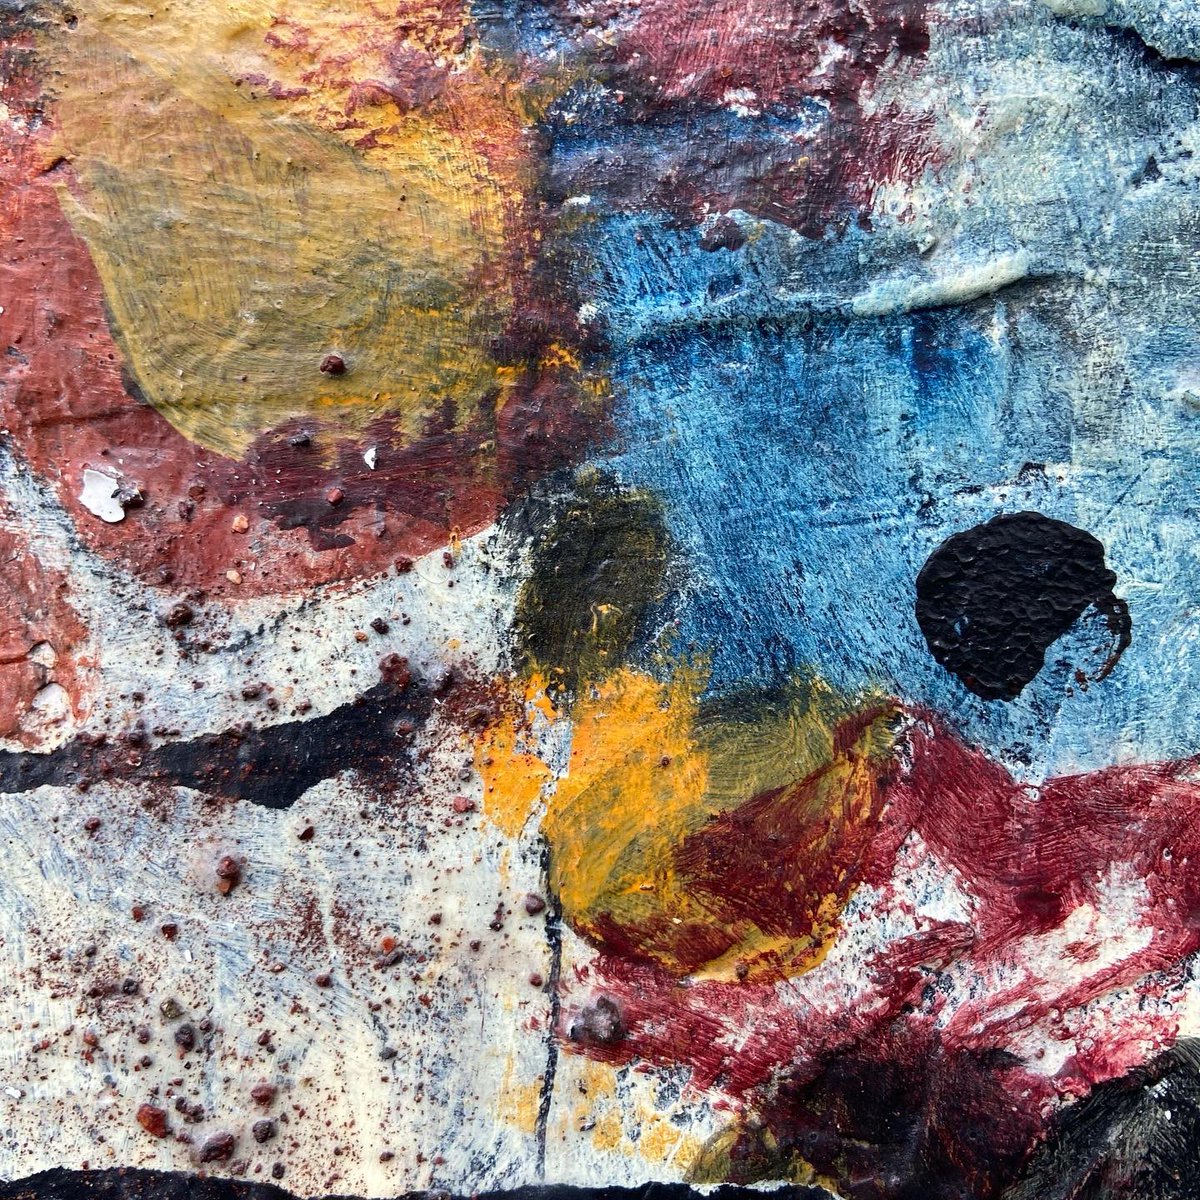 details

something is starting to work with this 
600x600mm panel, colours & textures influenced by the iron slag seen at #garnddyrysforge 

#ironworks
#breconbeacons 
#blaenavon
#workoncanvas 
#texture
#abstract
#mixedmediaart